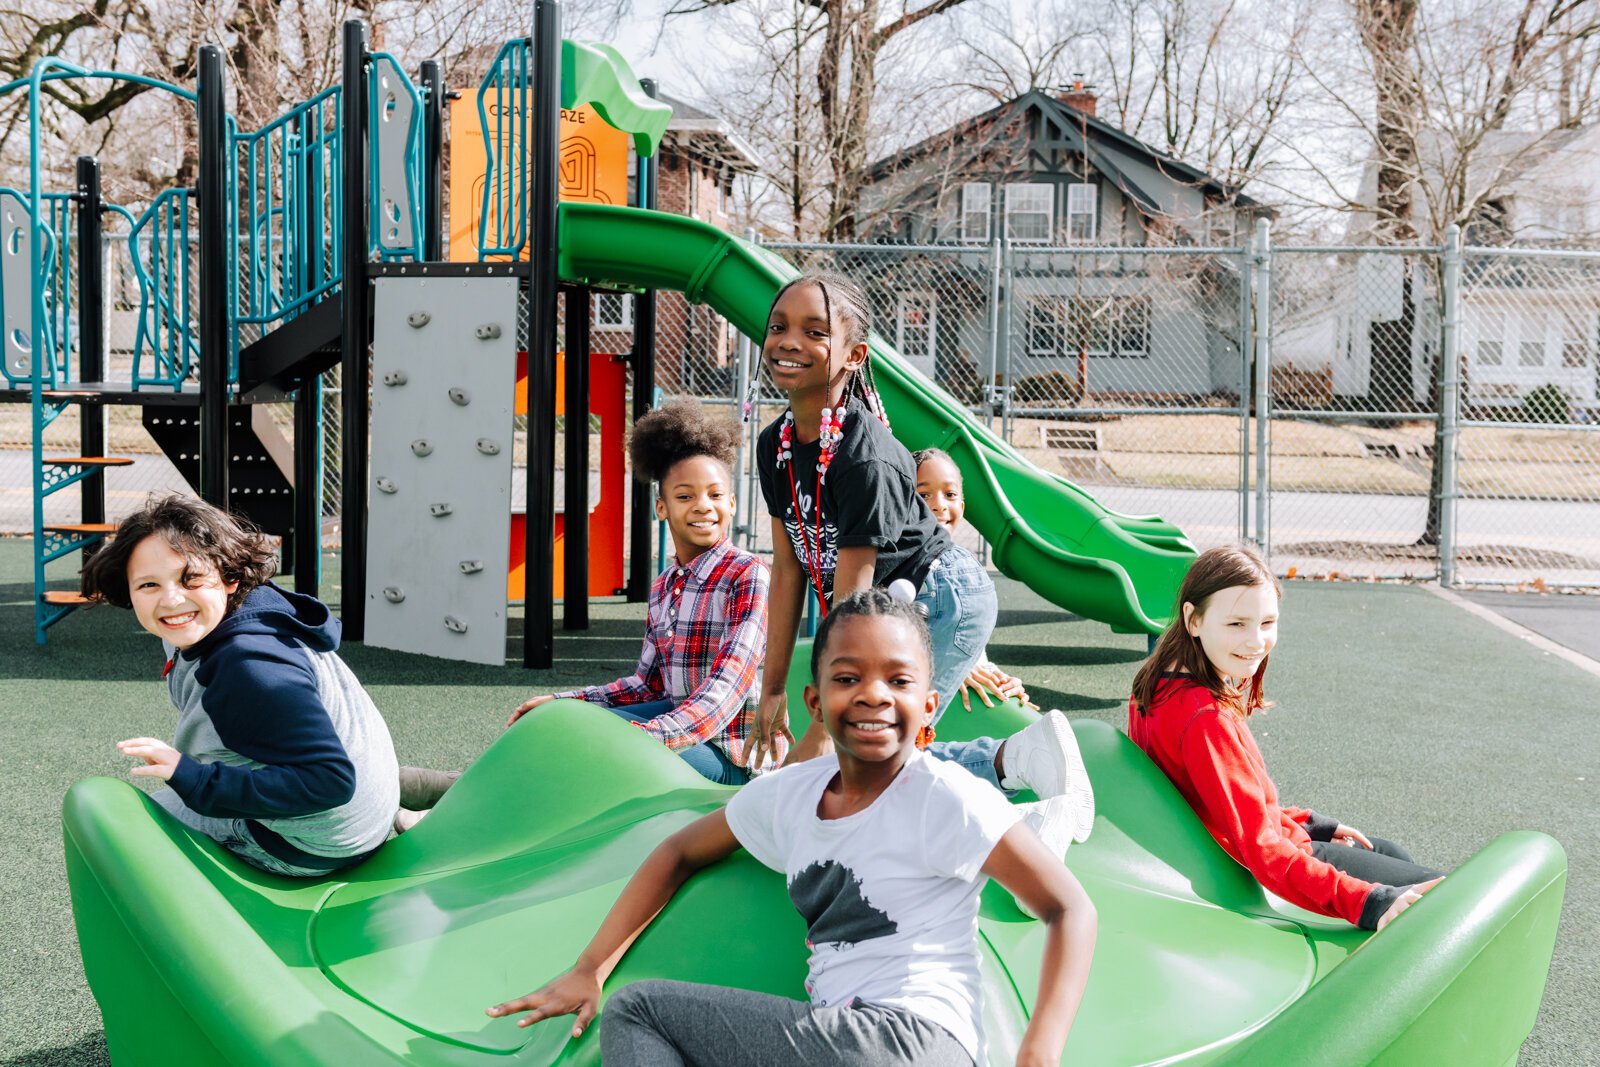 Children enjoy the playground equipment during the fourth grade recess at Forest Park Elementary School.